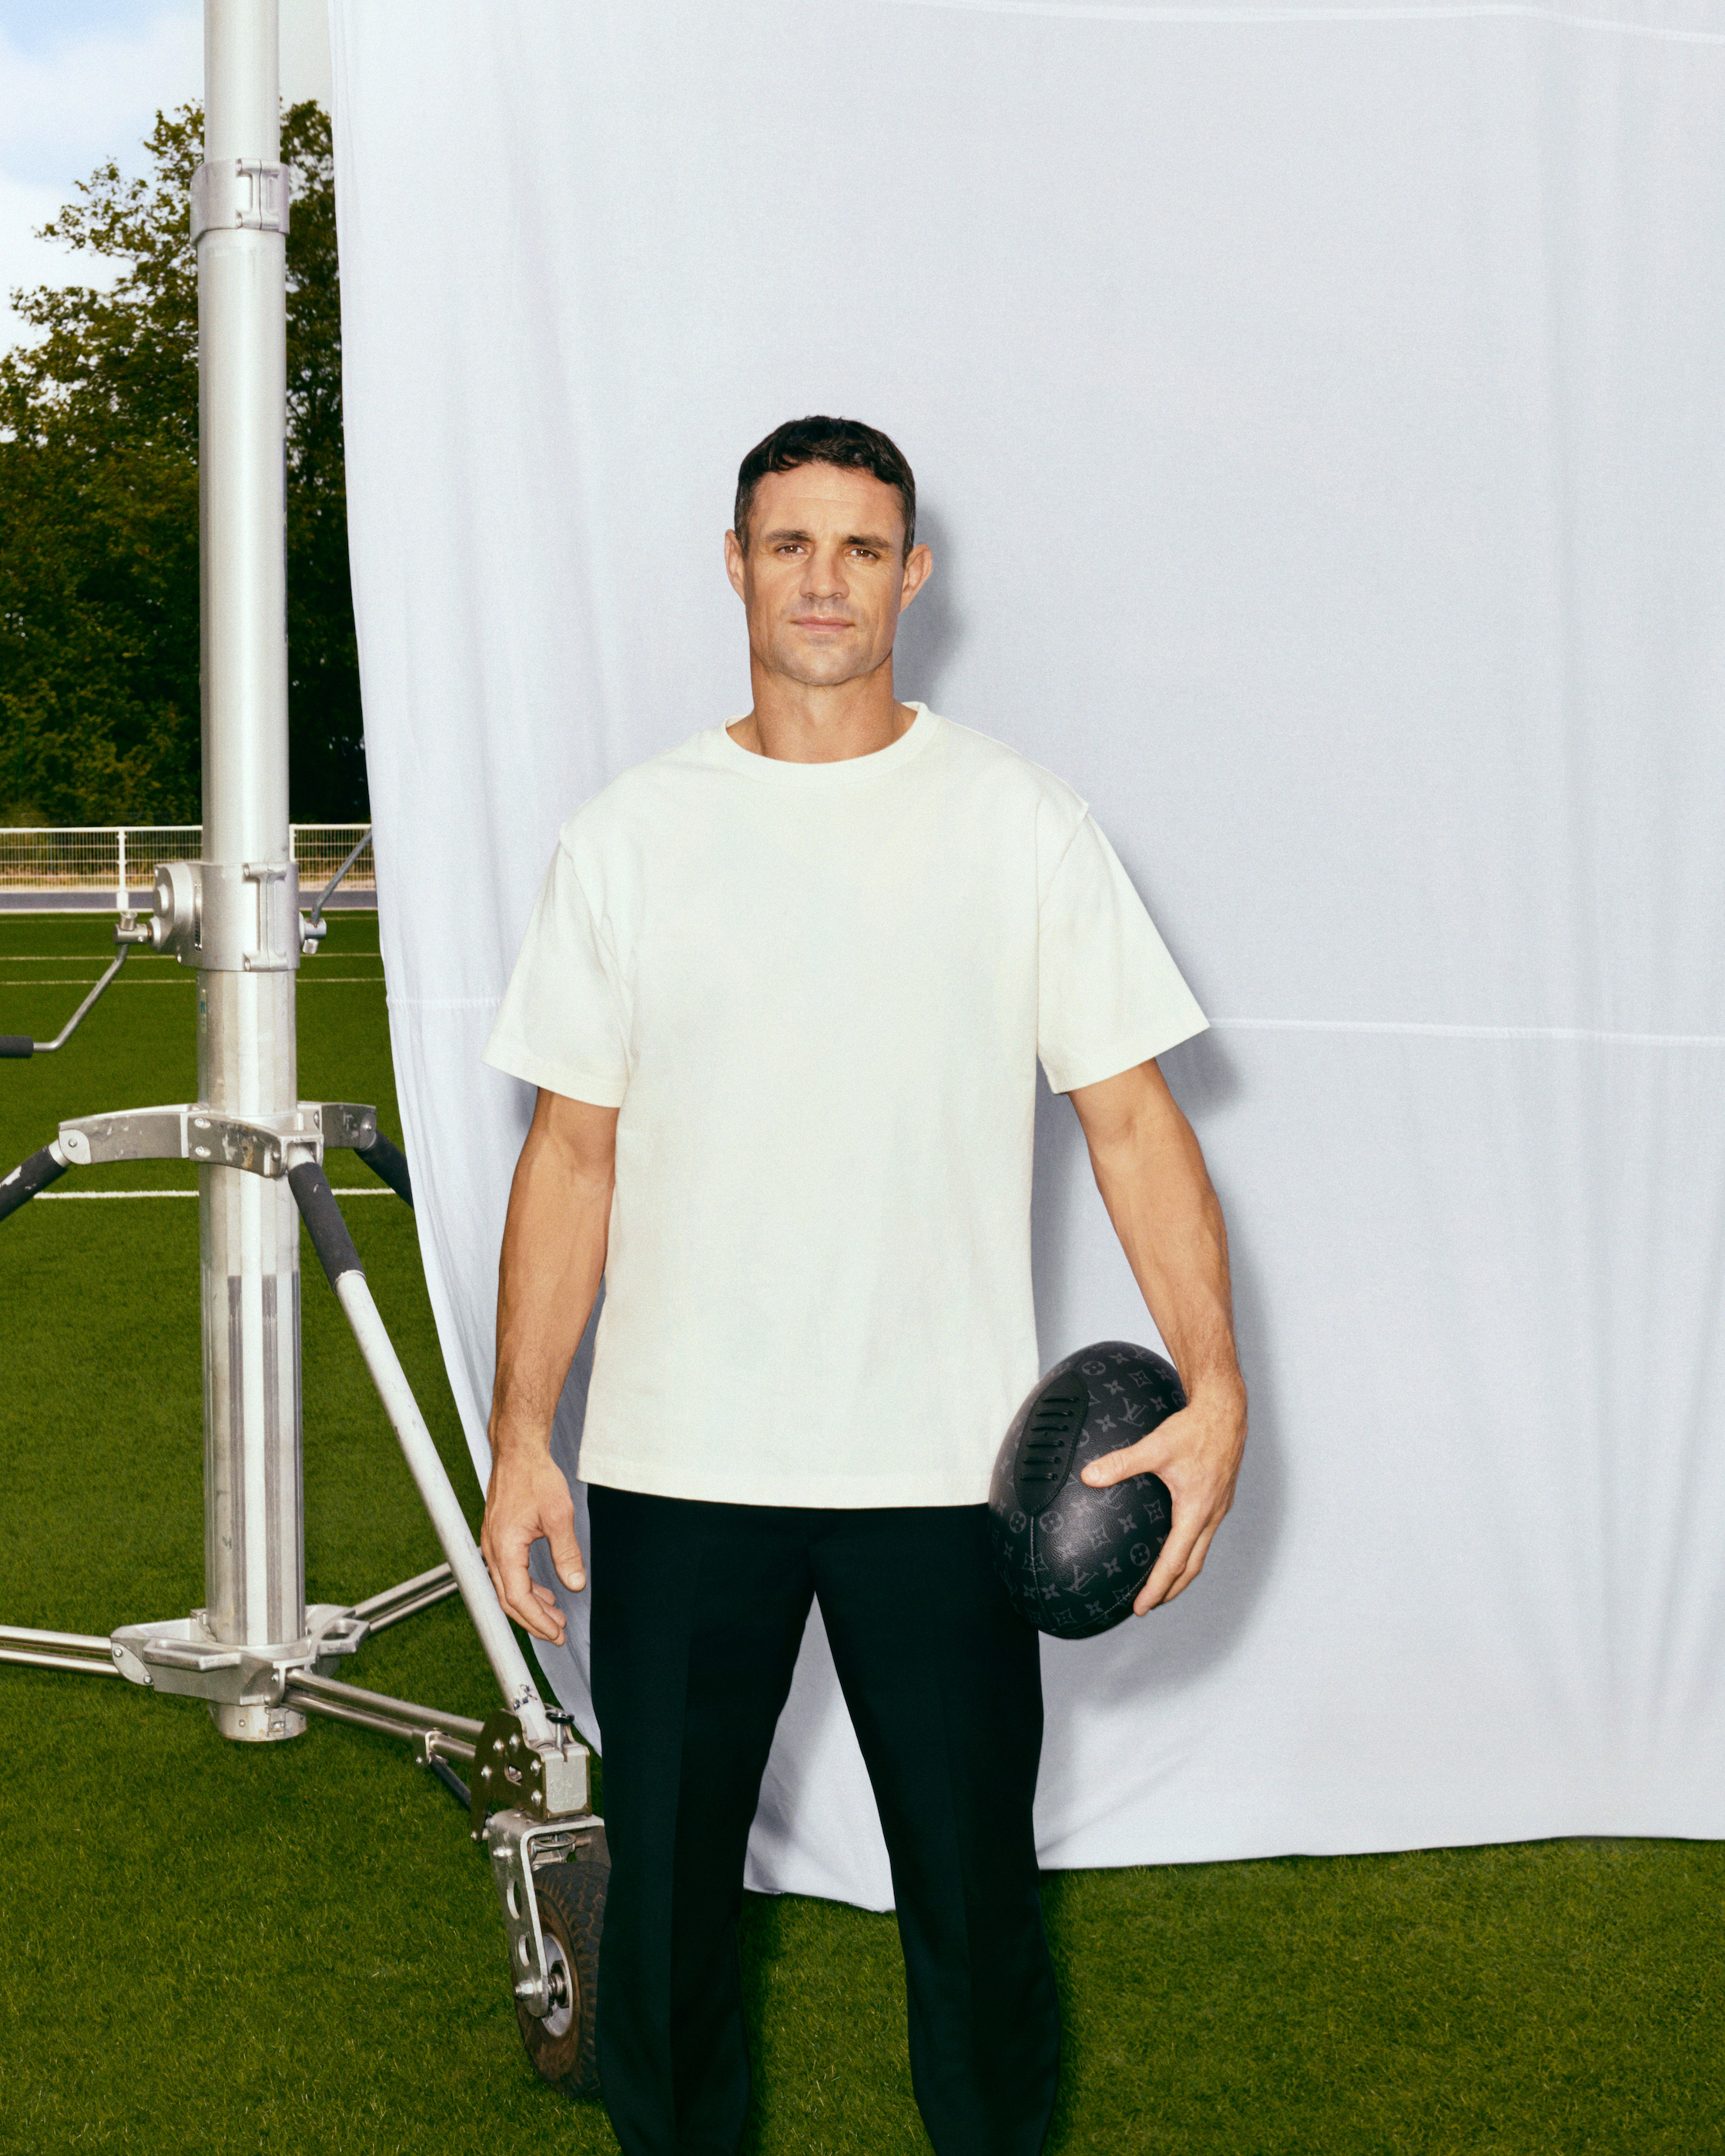 Louis Vuitton teams up with Dan Carter to unveil first collaborative trunk  - HIGHXTAR.